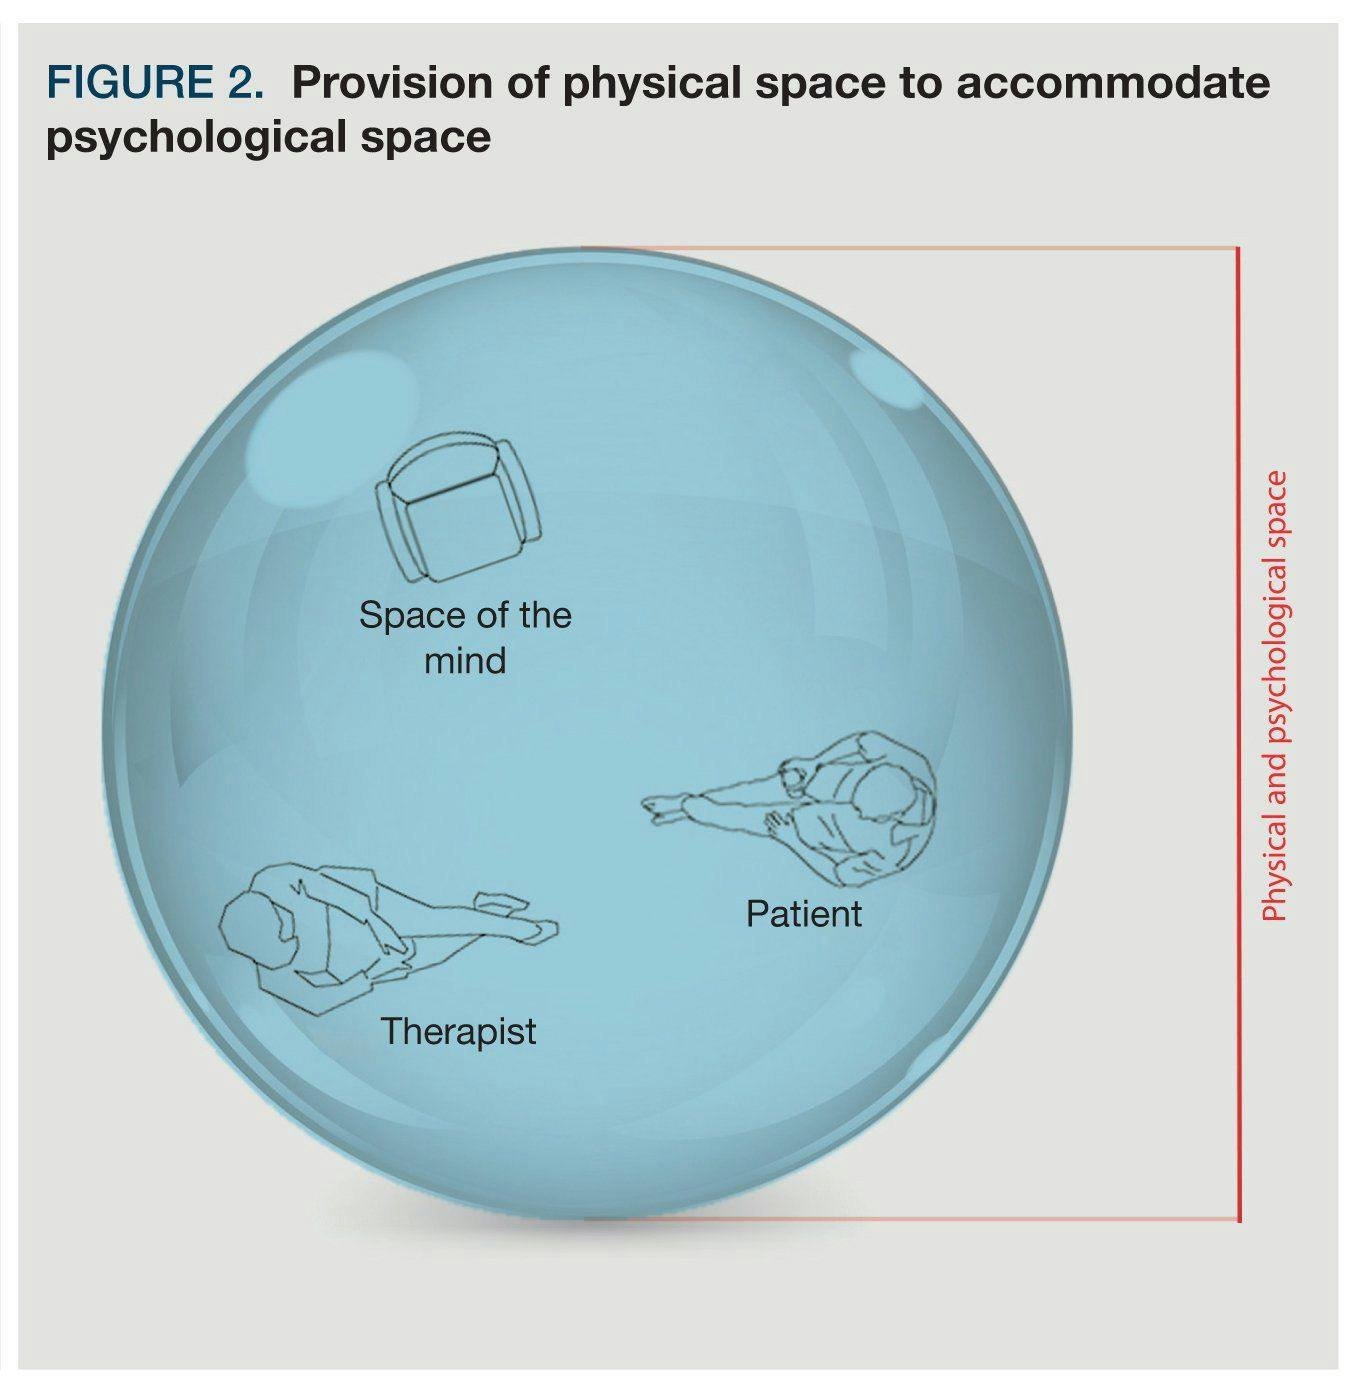 Provision of physical space to accommodate psychological space